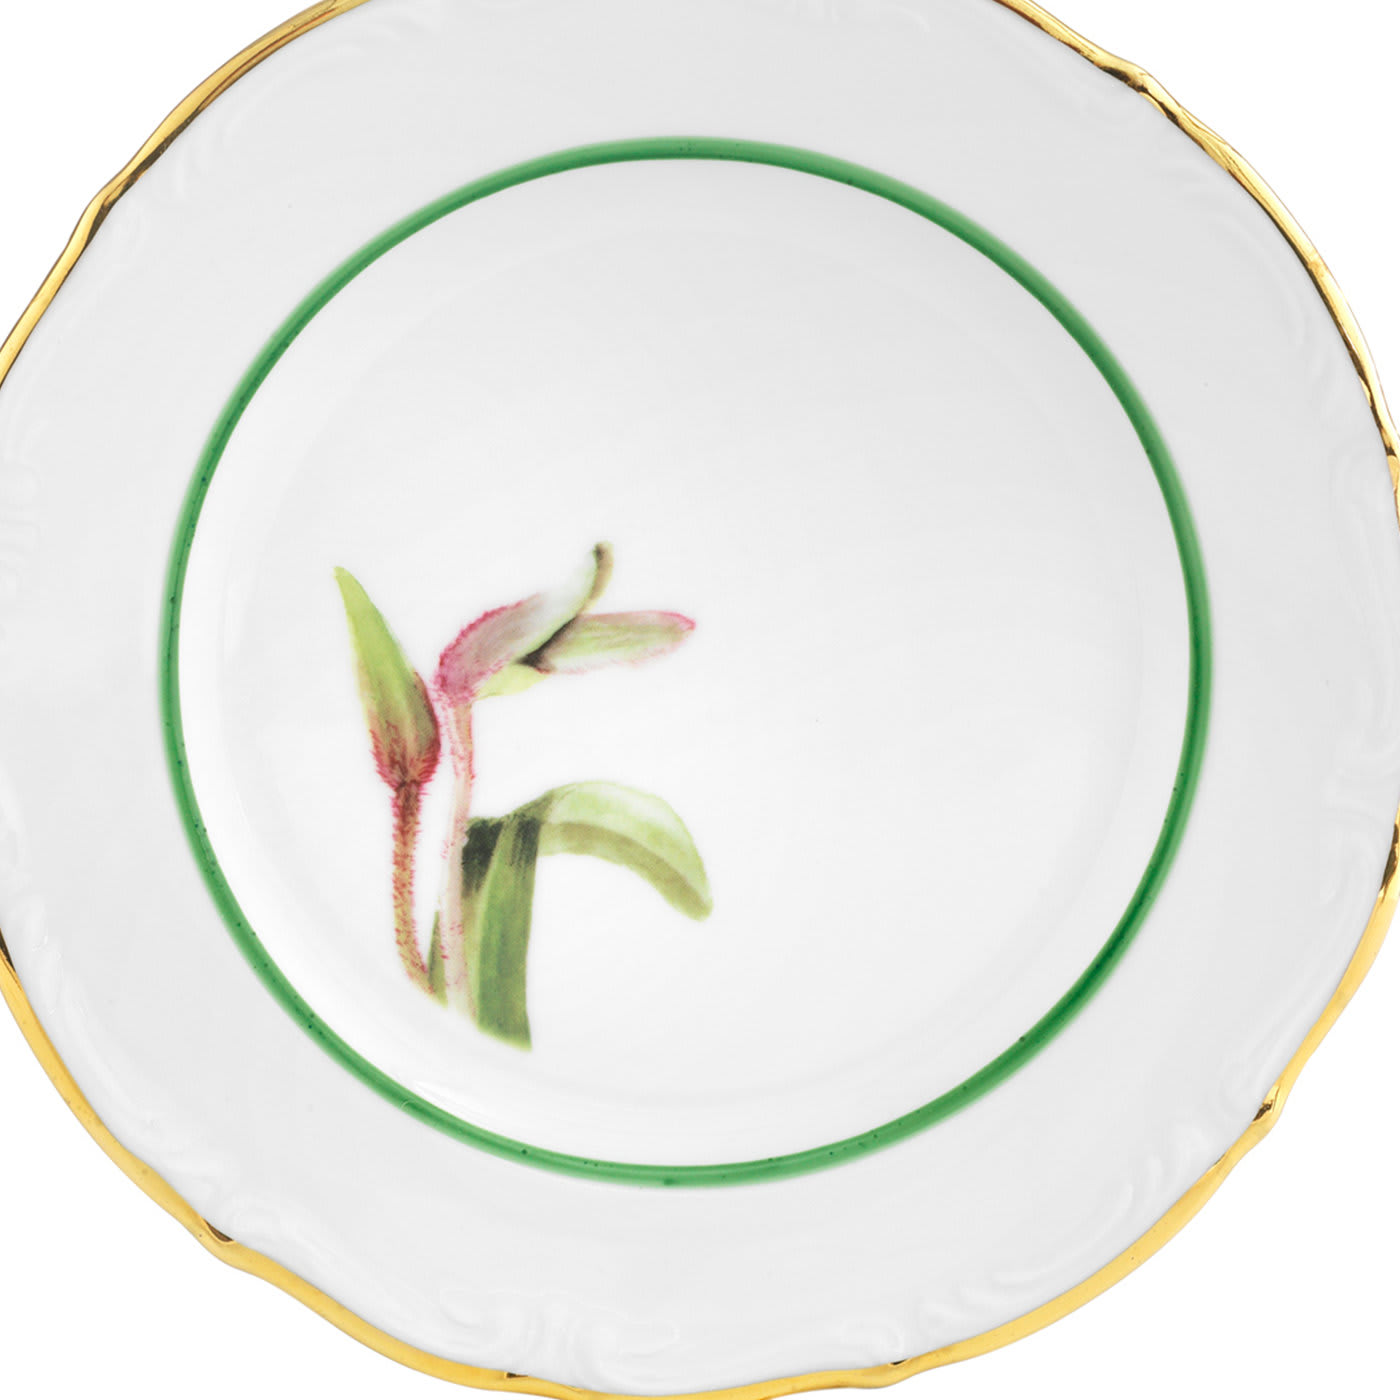 Orchidee Set of 3 Plates - Paola Caselli